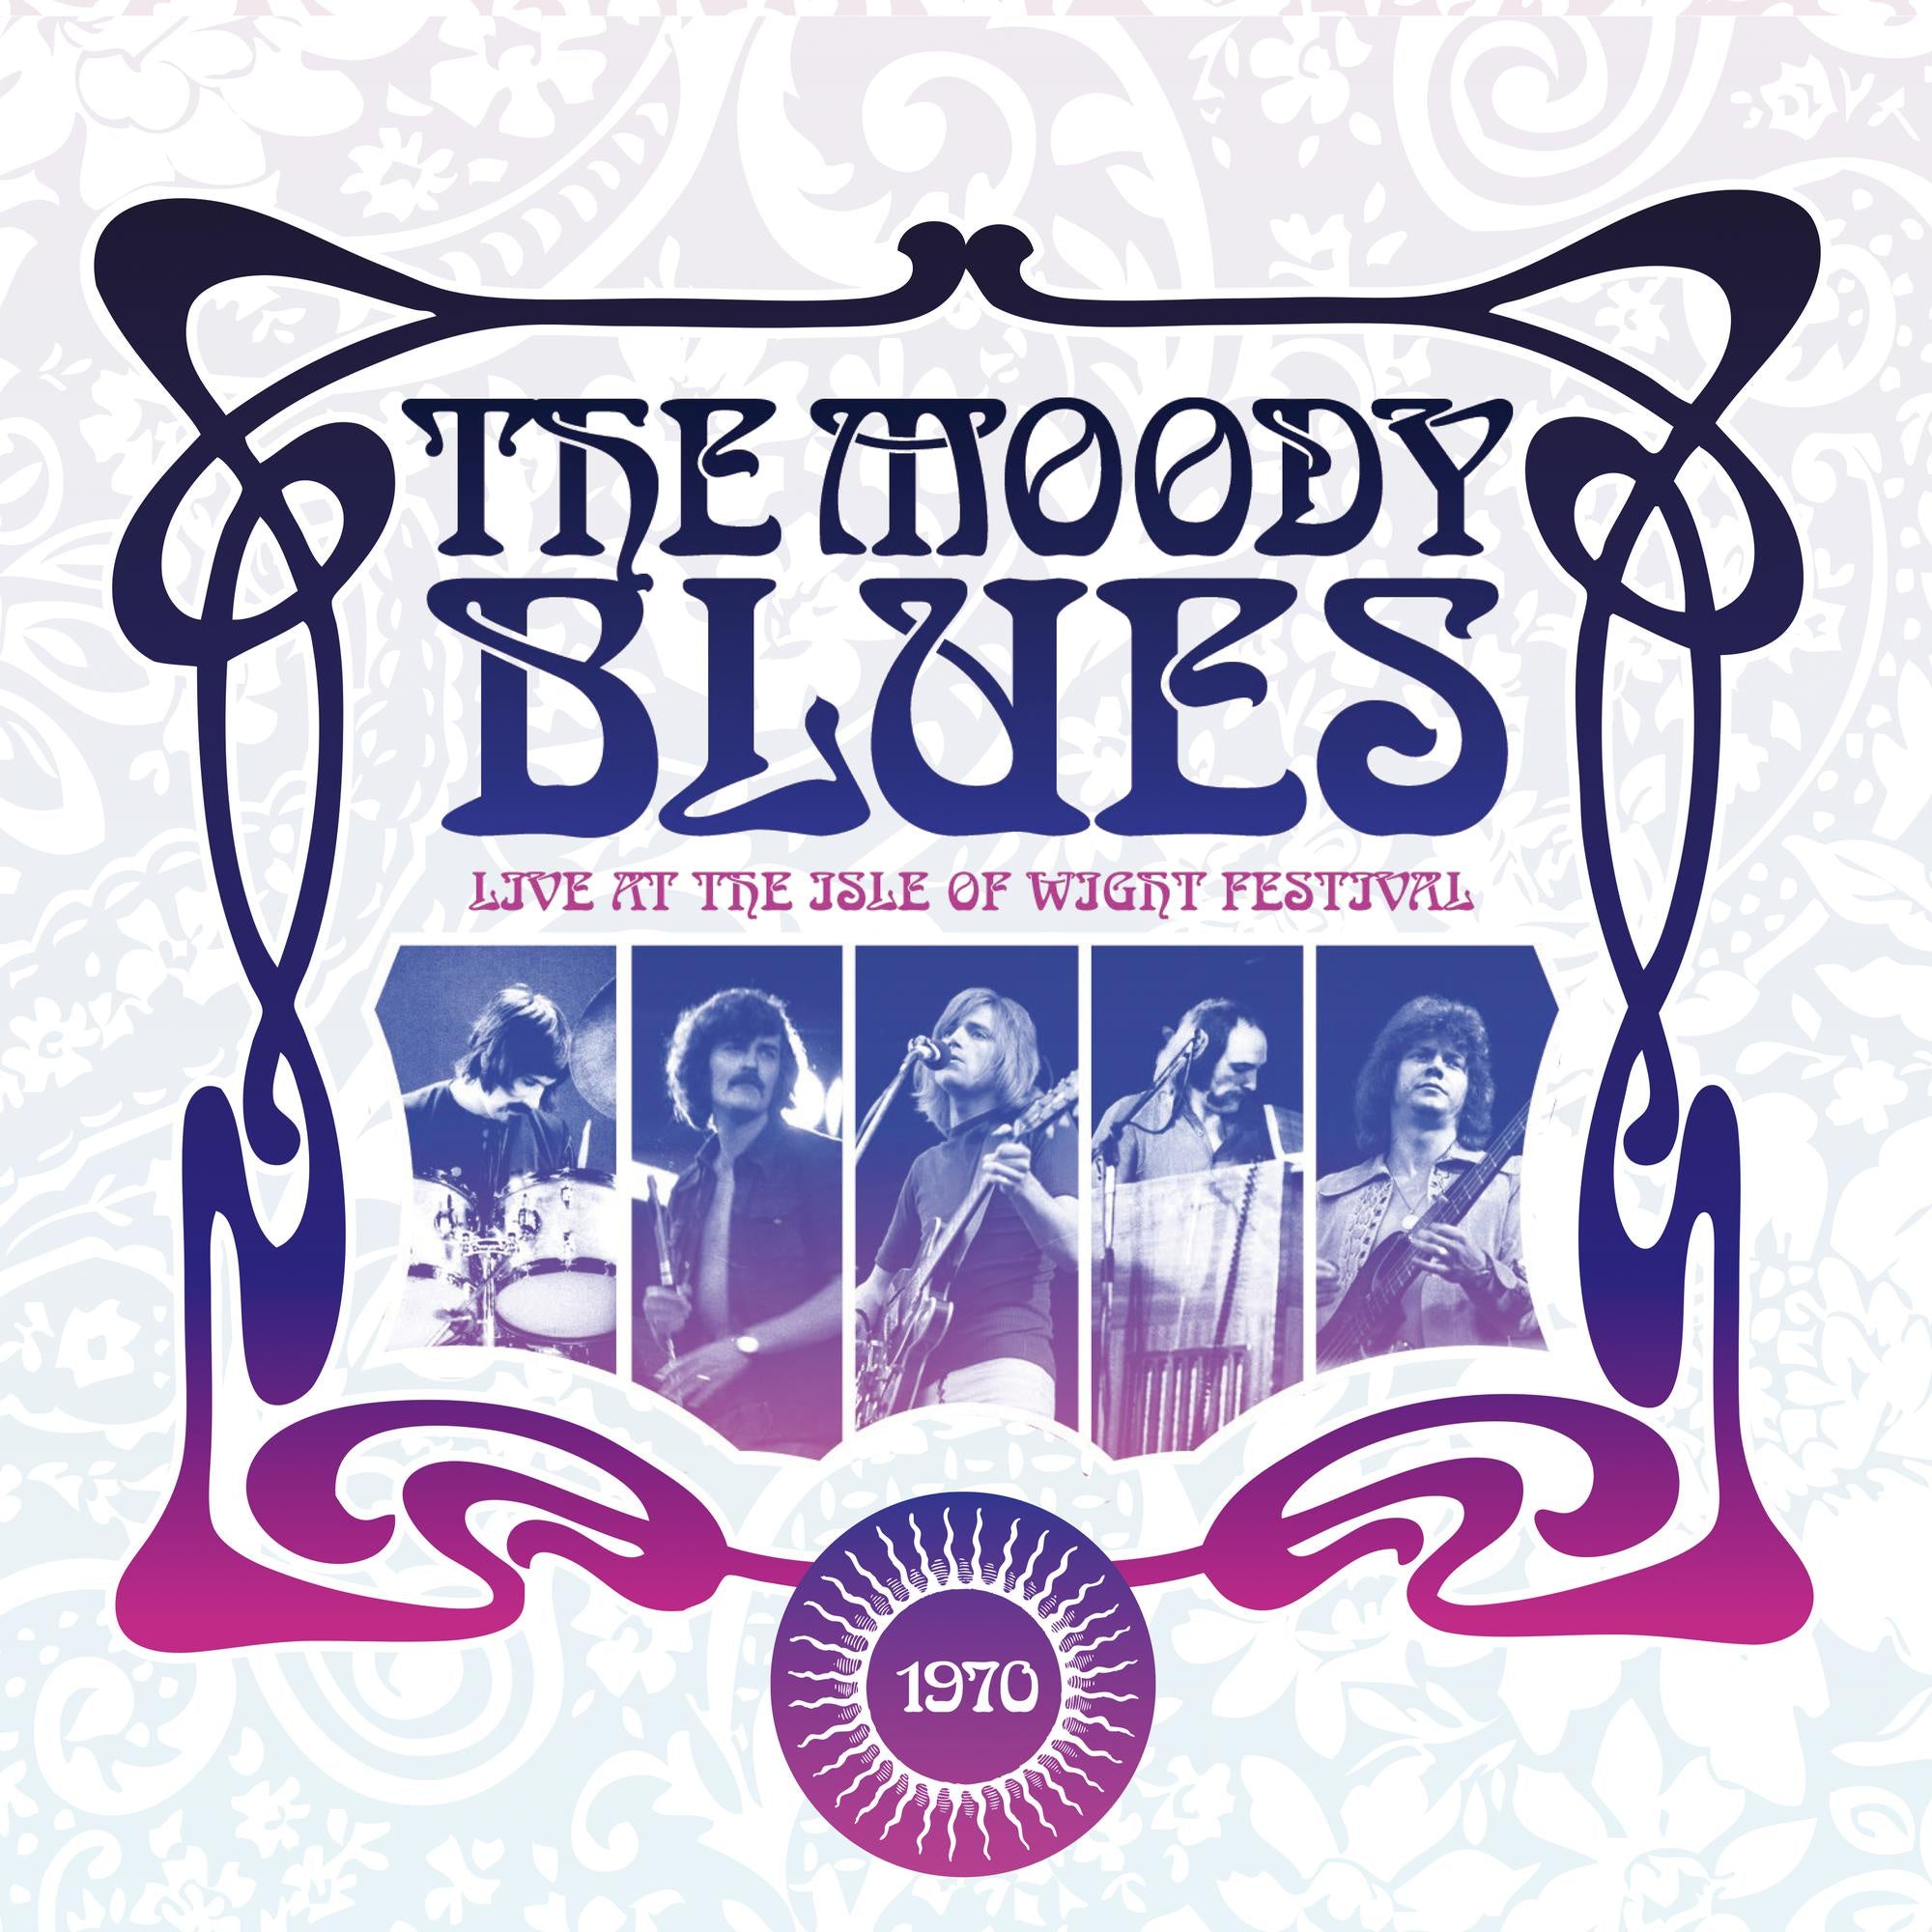 The Moody Blues ‎– Live At The Isle Of Wight Festival 1970 - New 2 LP Record 2020 Ear Music Classics Limited Edition 180 Gram Vinyl - Rock